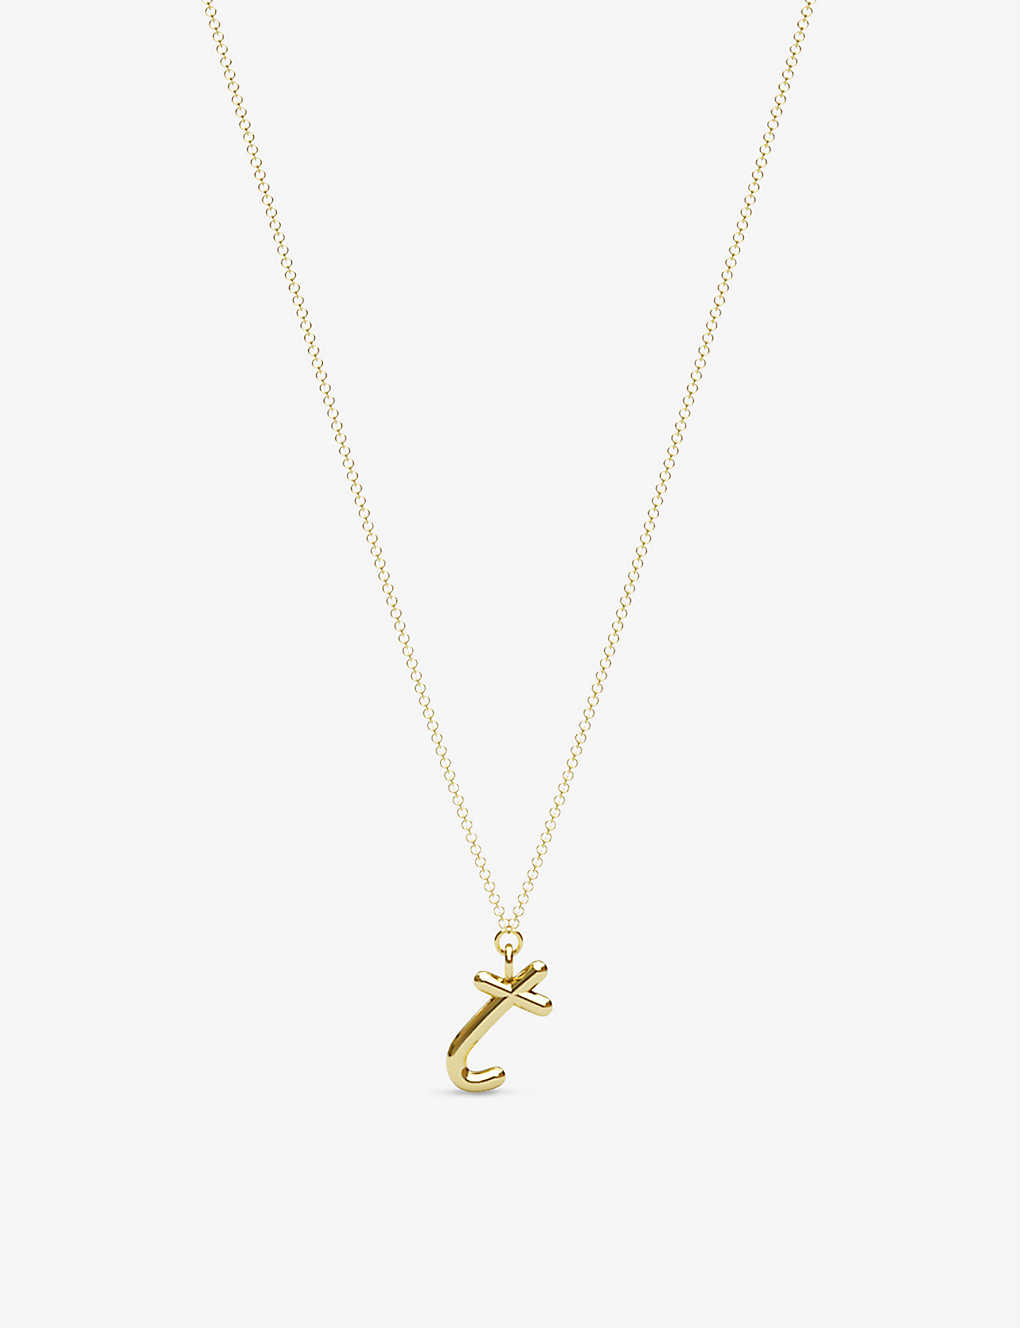 Shop The Alkemistry Women's 18ct Yellow Gold Love Letter T Initial 18ct Yellow-gold Pendant Necklace